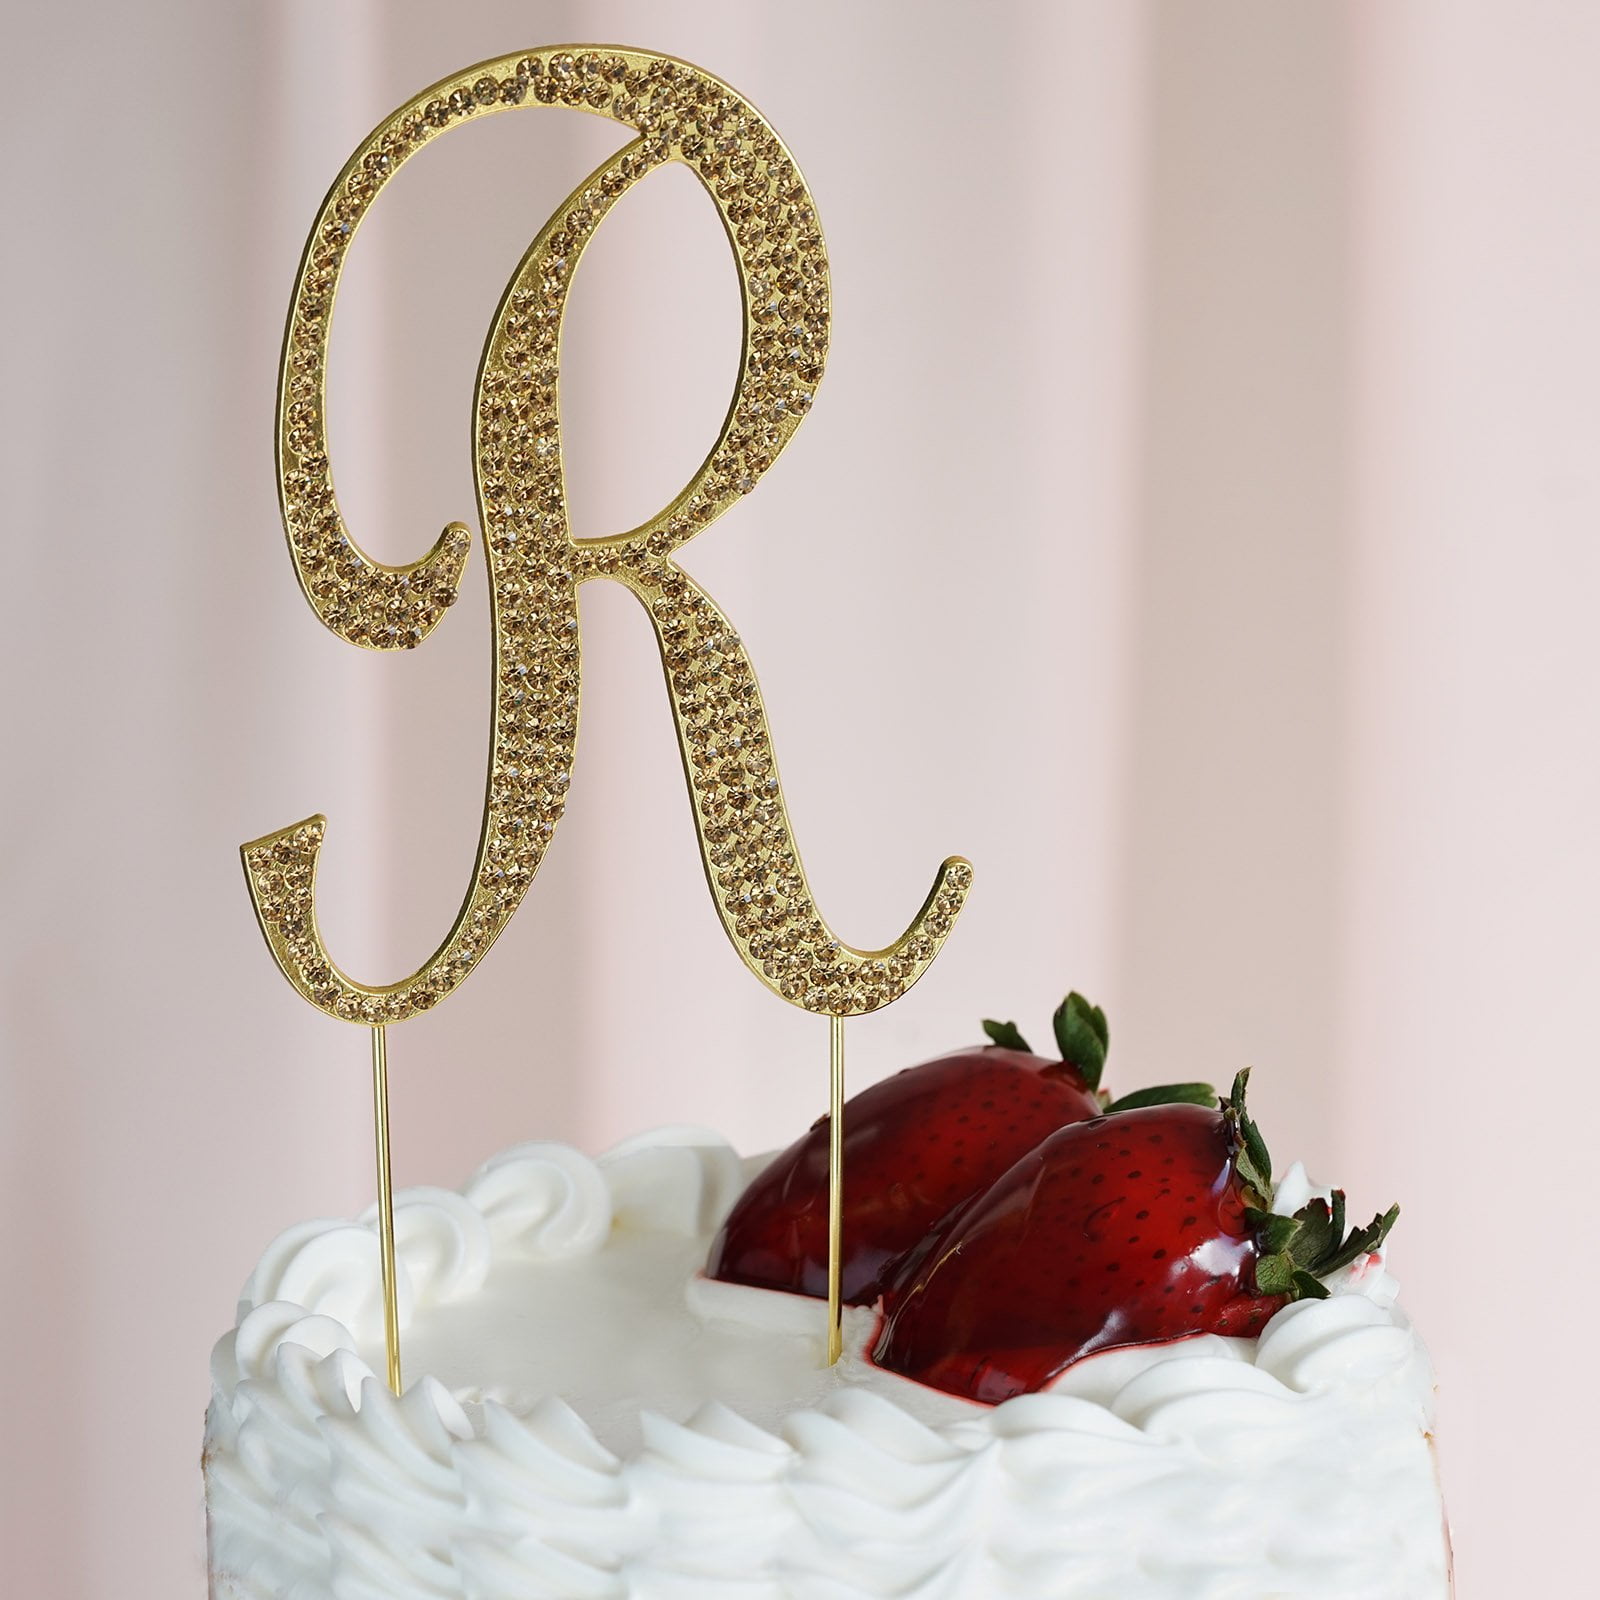 4.5" Tall Letter R Bling Rhinestone  Wedding Party Cake Topper 